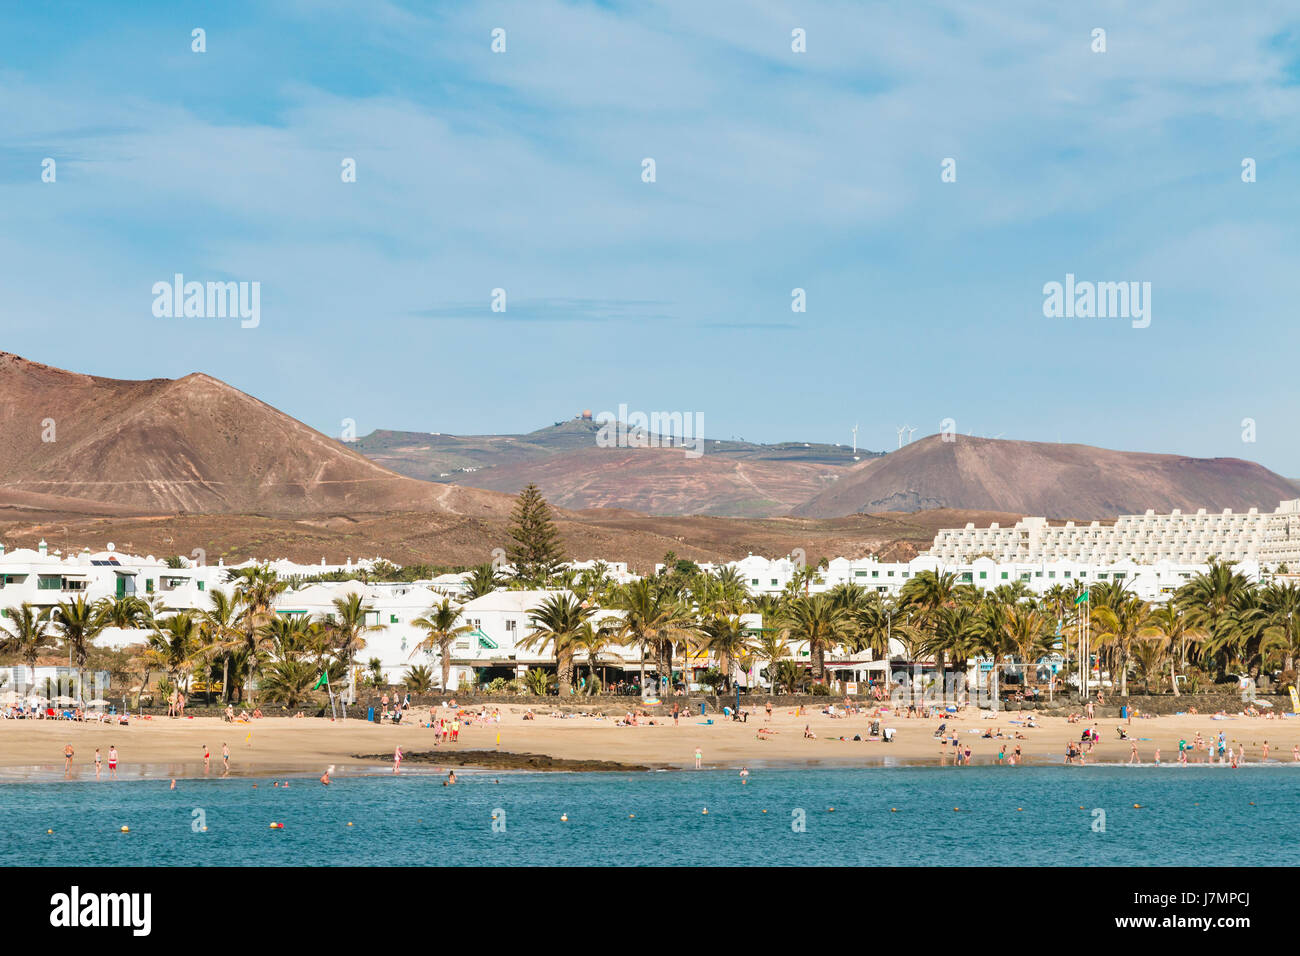 LANZAROTE - JANUARY 14: People at Costa Teguise Beach in Lanzarote, Spain with the village in the background on January 14, 2016. Stock Photo